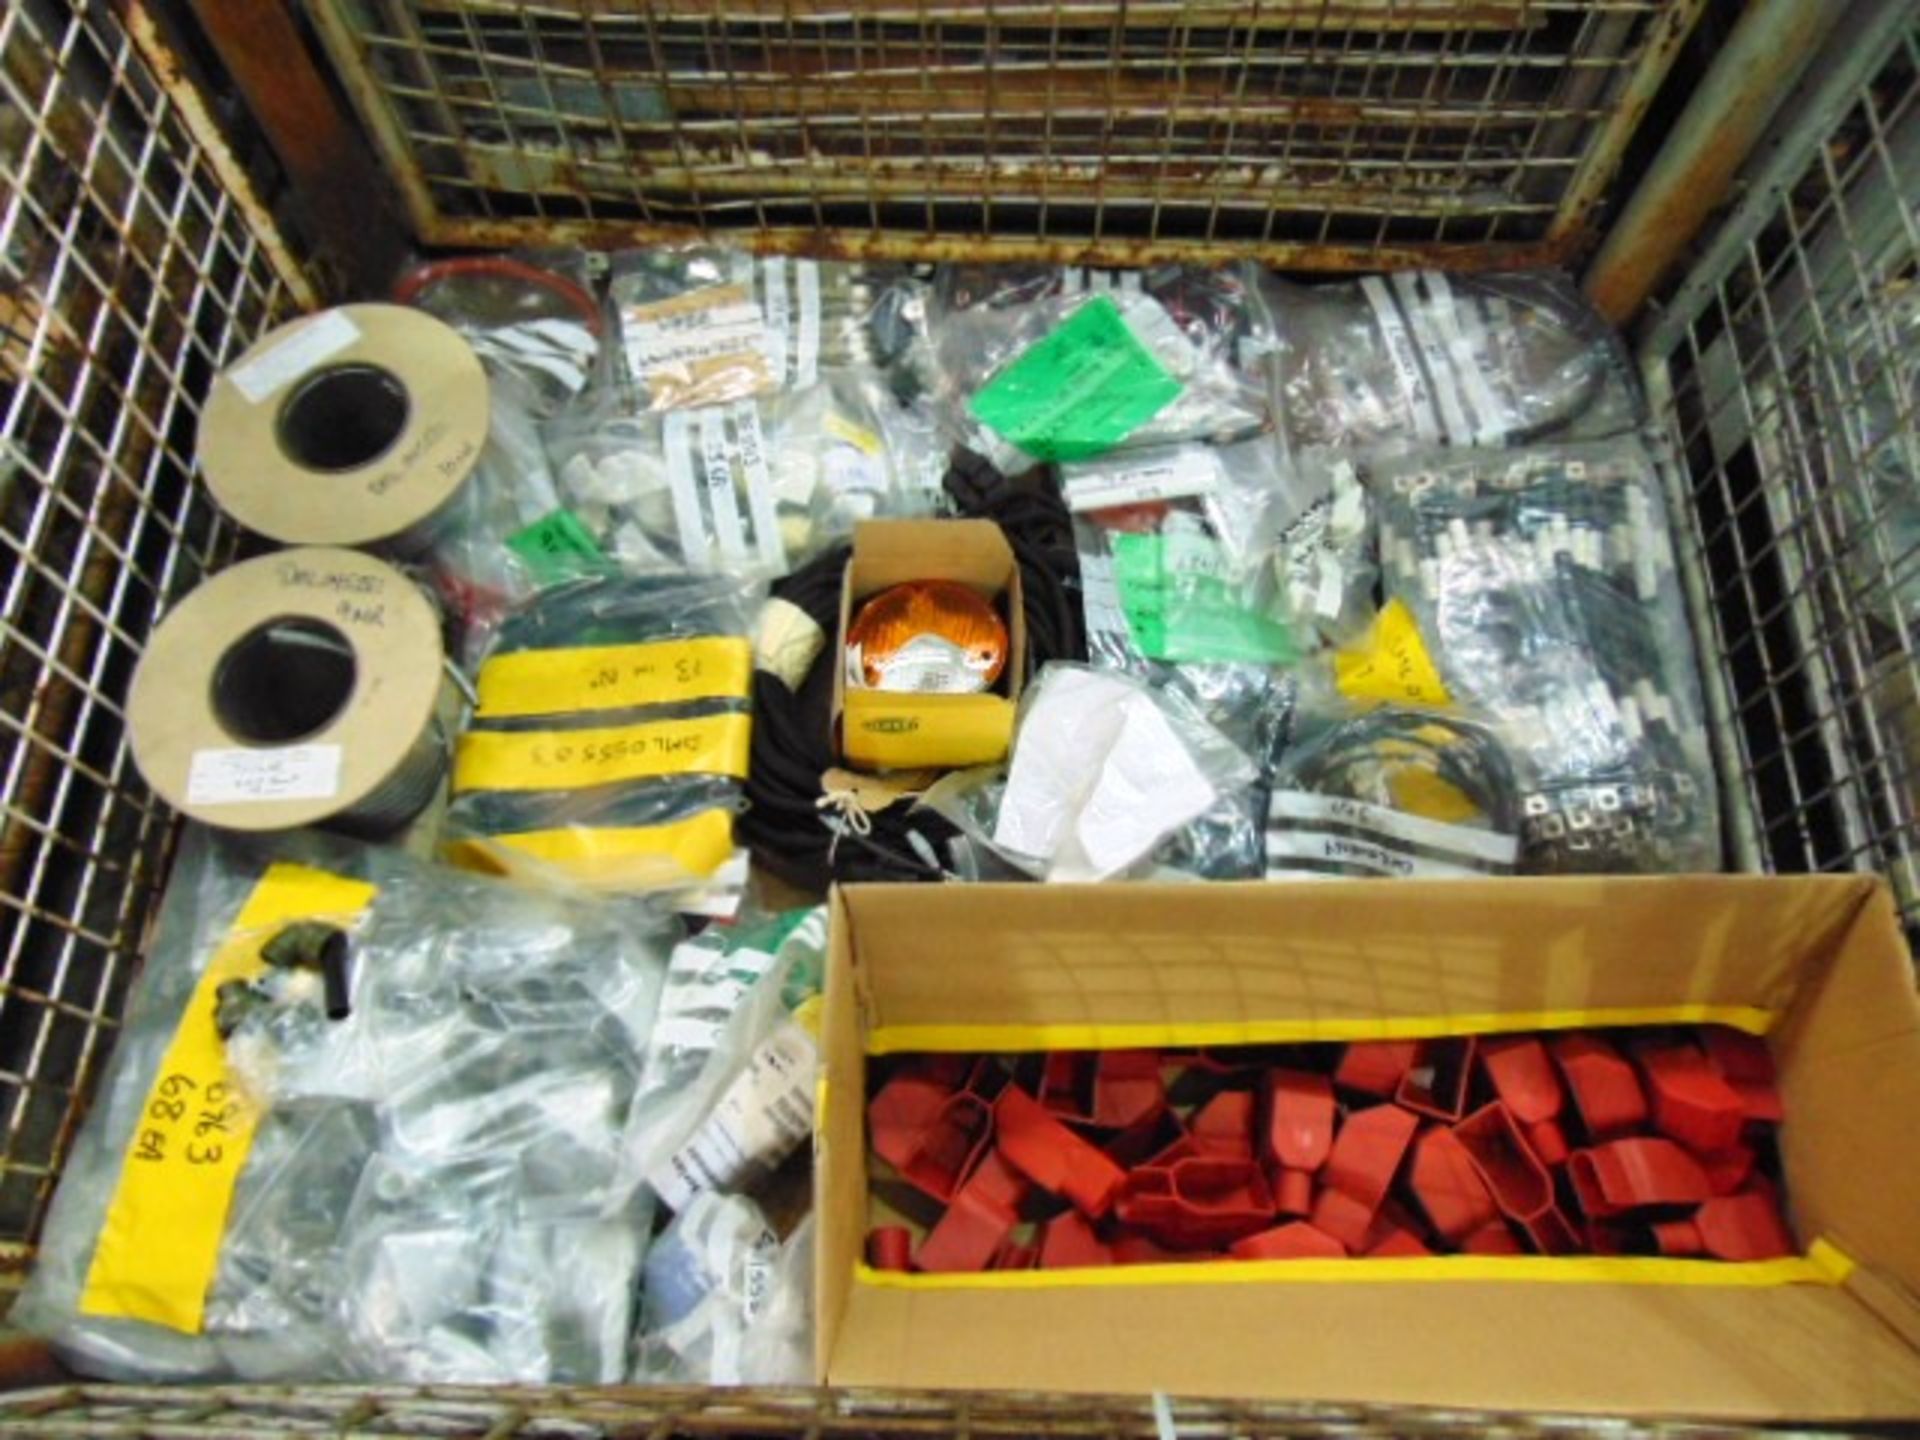 Mixed Stillage of Electrical Eqpt, Cable Reels, Power Sockets, Earth Leads, Terminal Covers etc